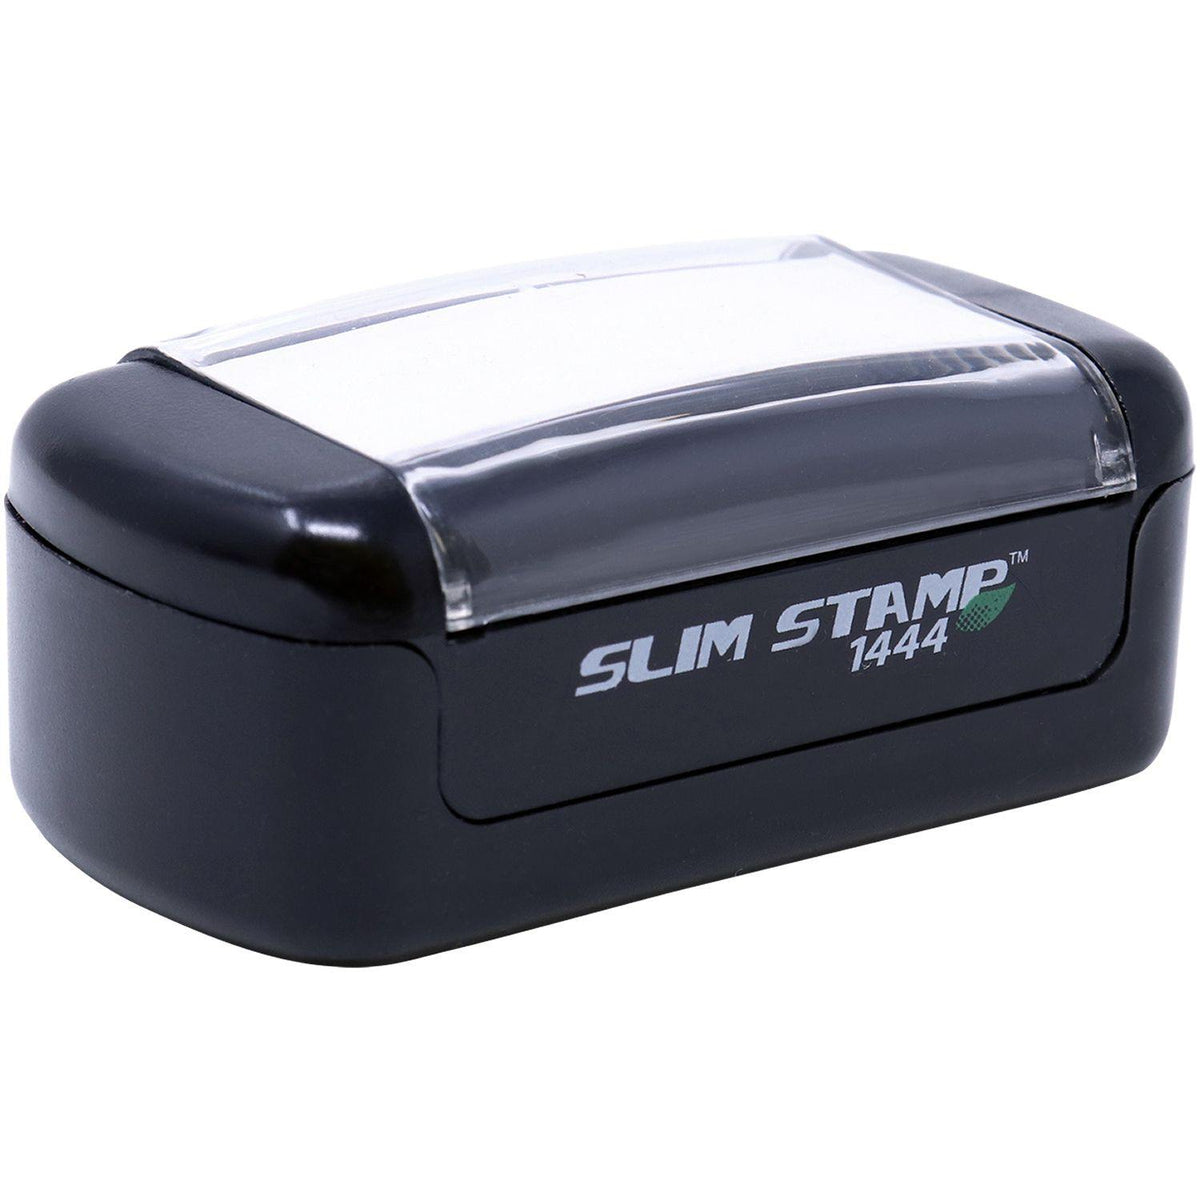 Slim Pre Inked Balanced Stamp - Engineer Seal Stamps - Brand_Slim, Impression Size_Small, Stamp Type_Pre-Inked Stamp, Type of Use_Finance